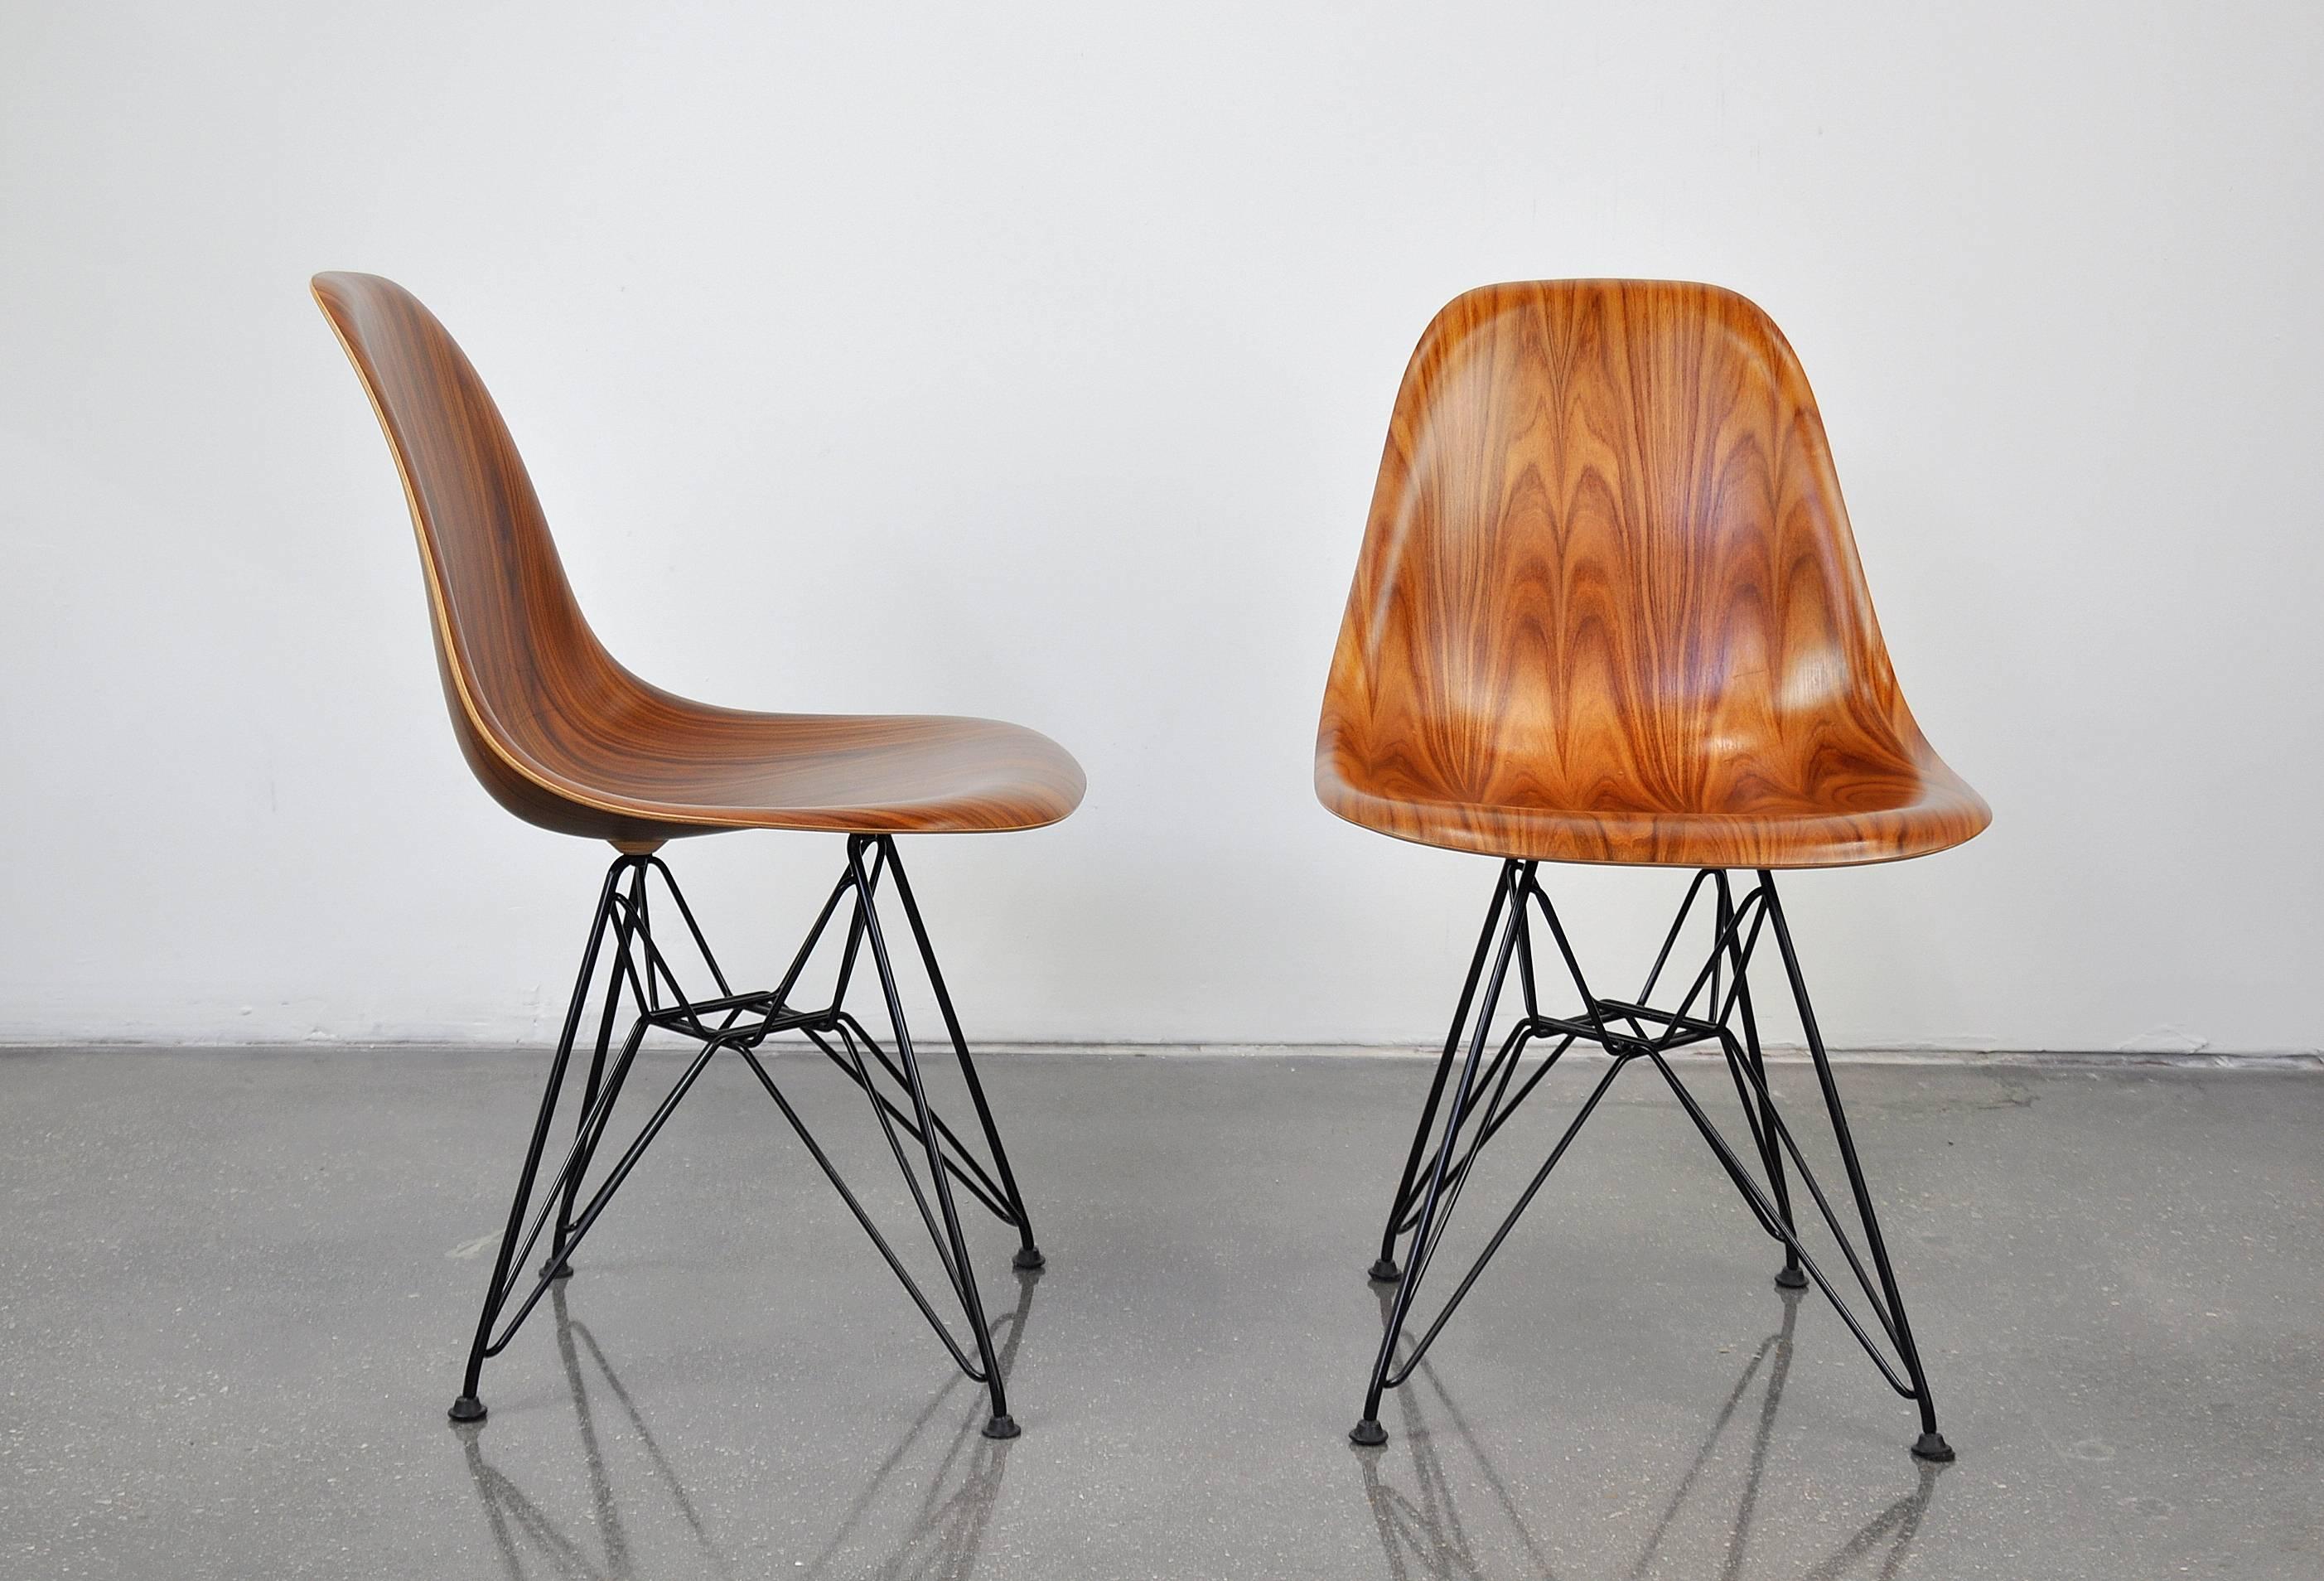 A gorgeous pair of Mid-Century Modern DWSR shell chairs designed by Charles and Ray Eames for Herman Miller. The pair of dining or side chairs feature molded Santos Palisander wood (similar to rosewood) shells and black wire base. Works well as